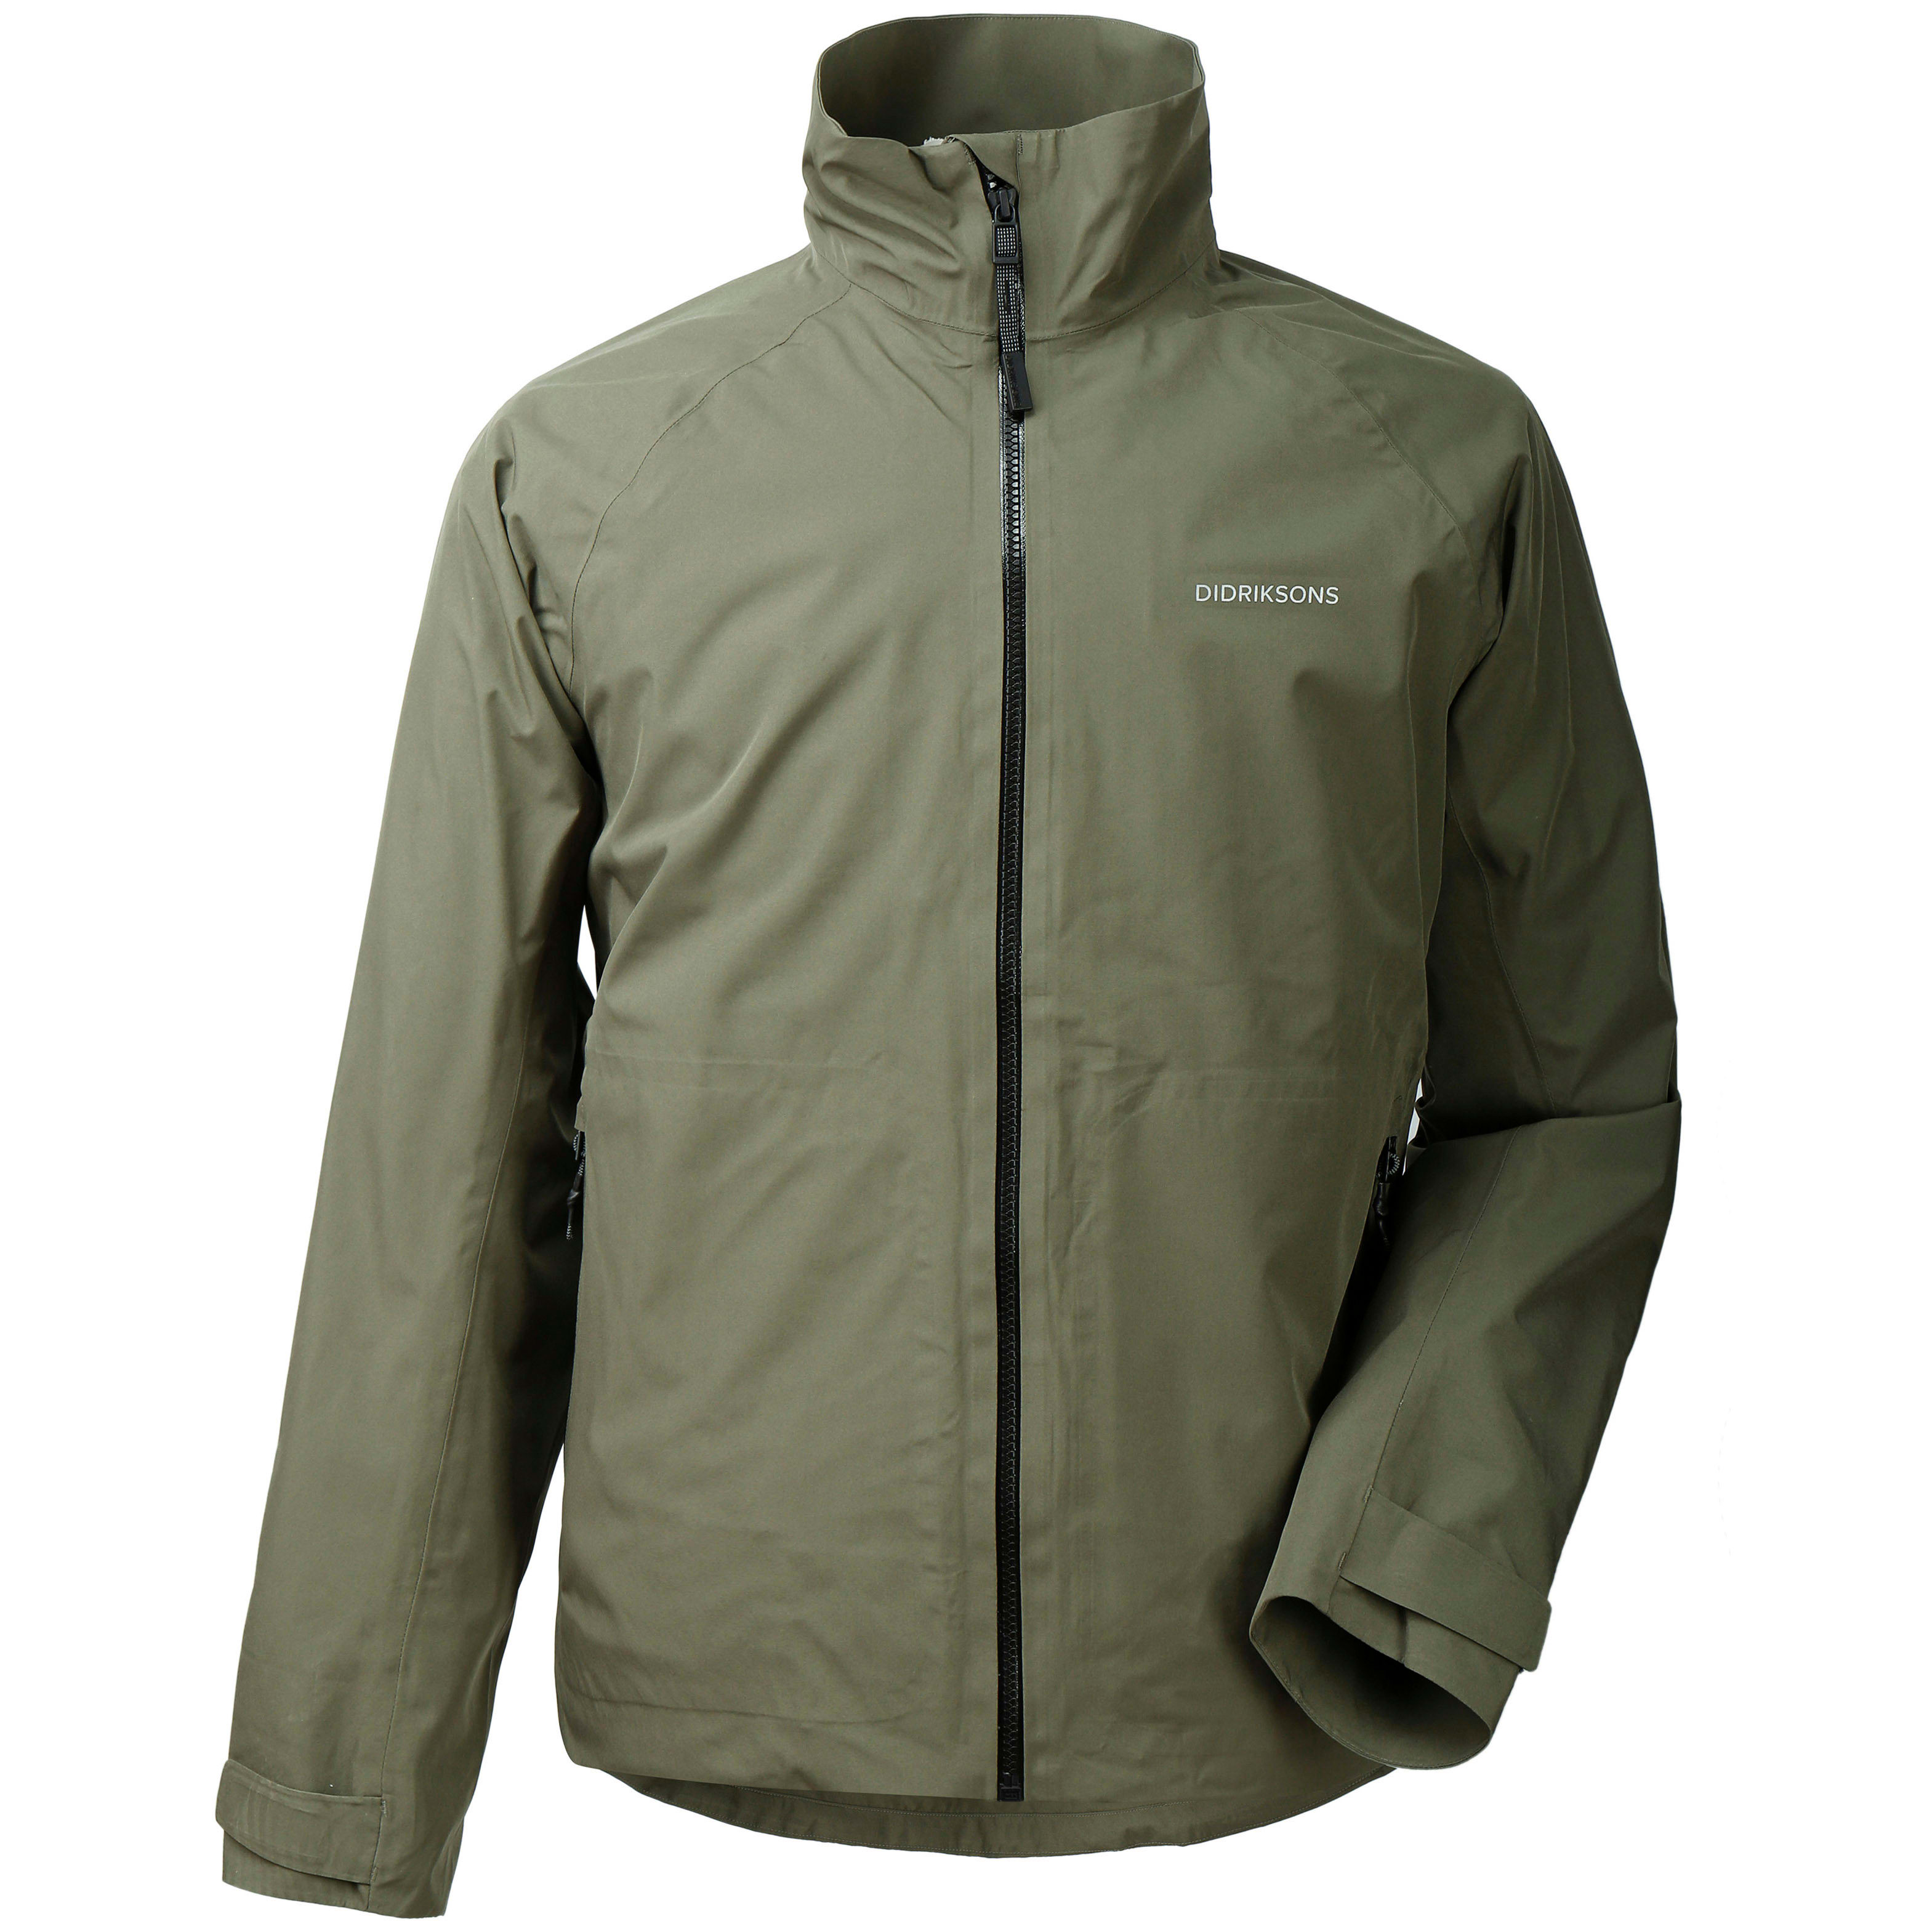 Didriksons Colin Men's Jacket - Outnorth